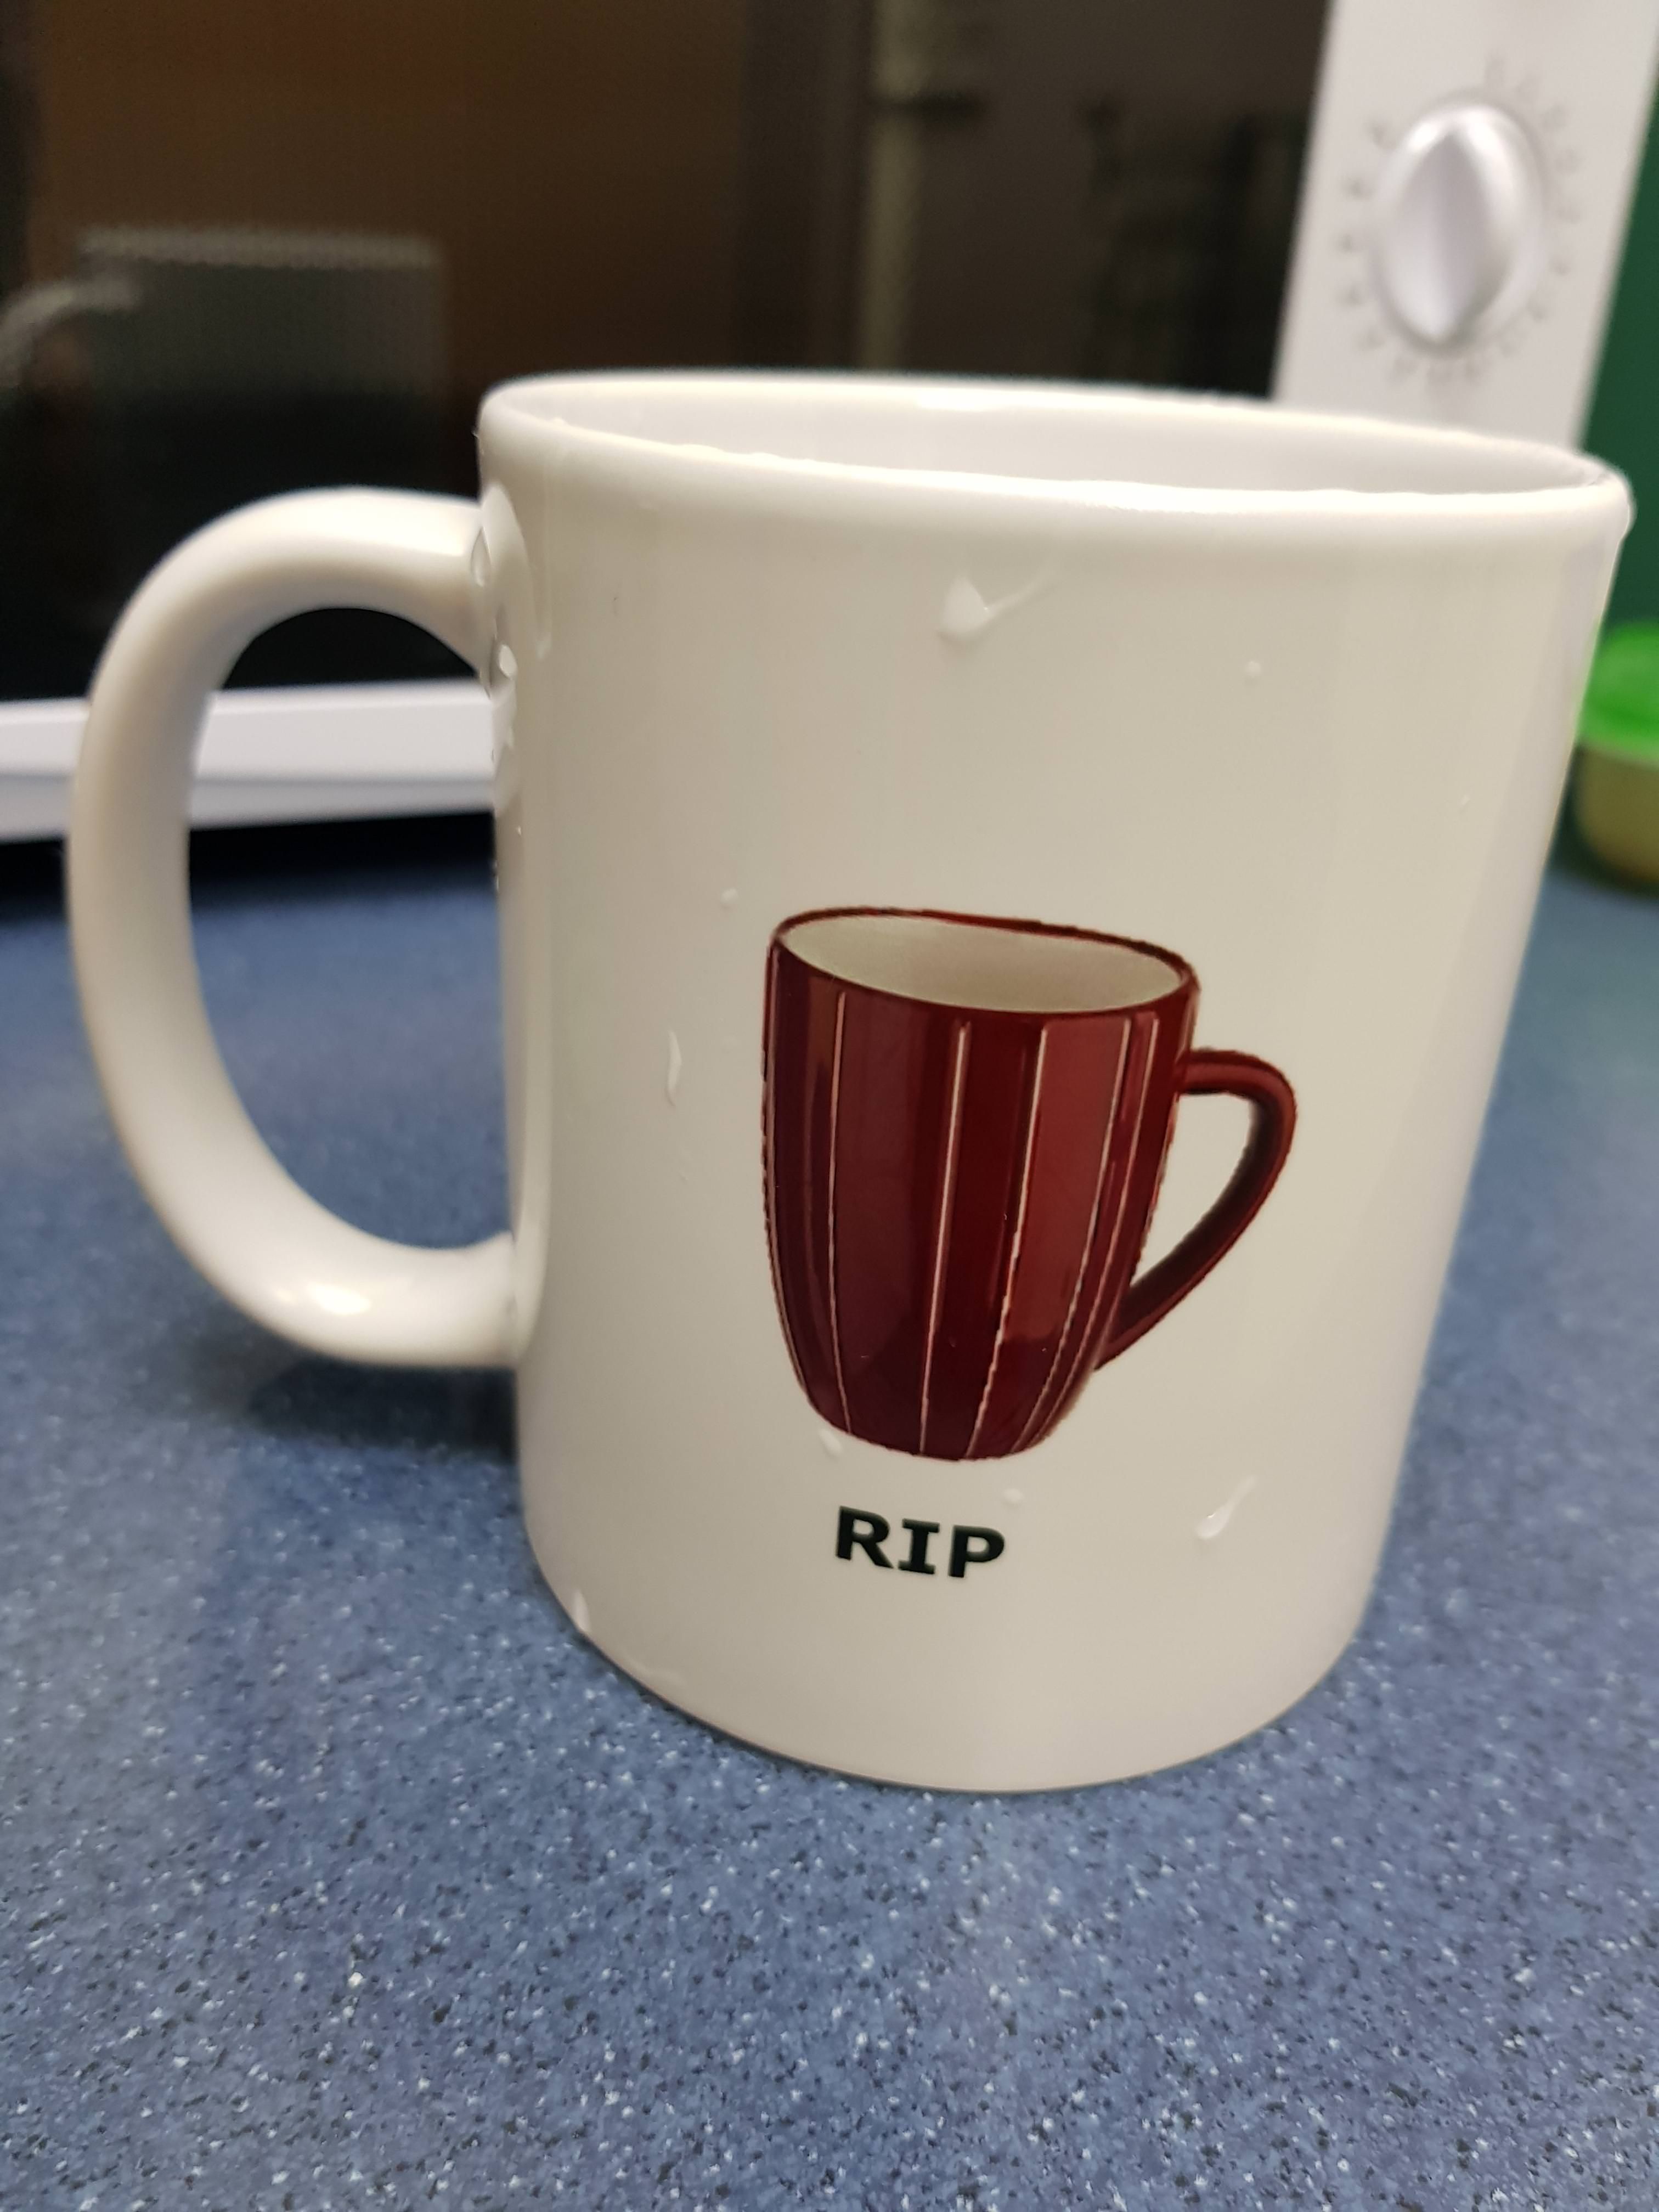 Broke my boss's mug that he had for 10 years. I think I got a suitable replacement.